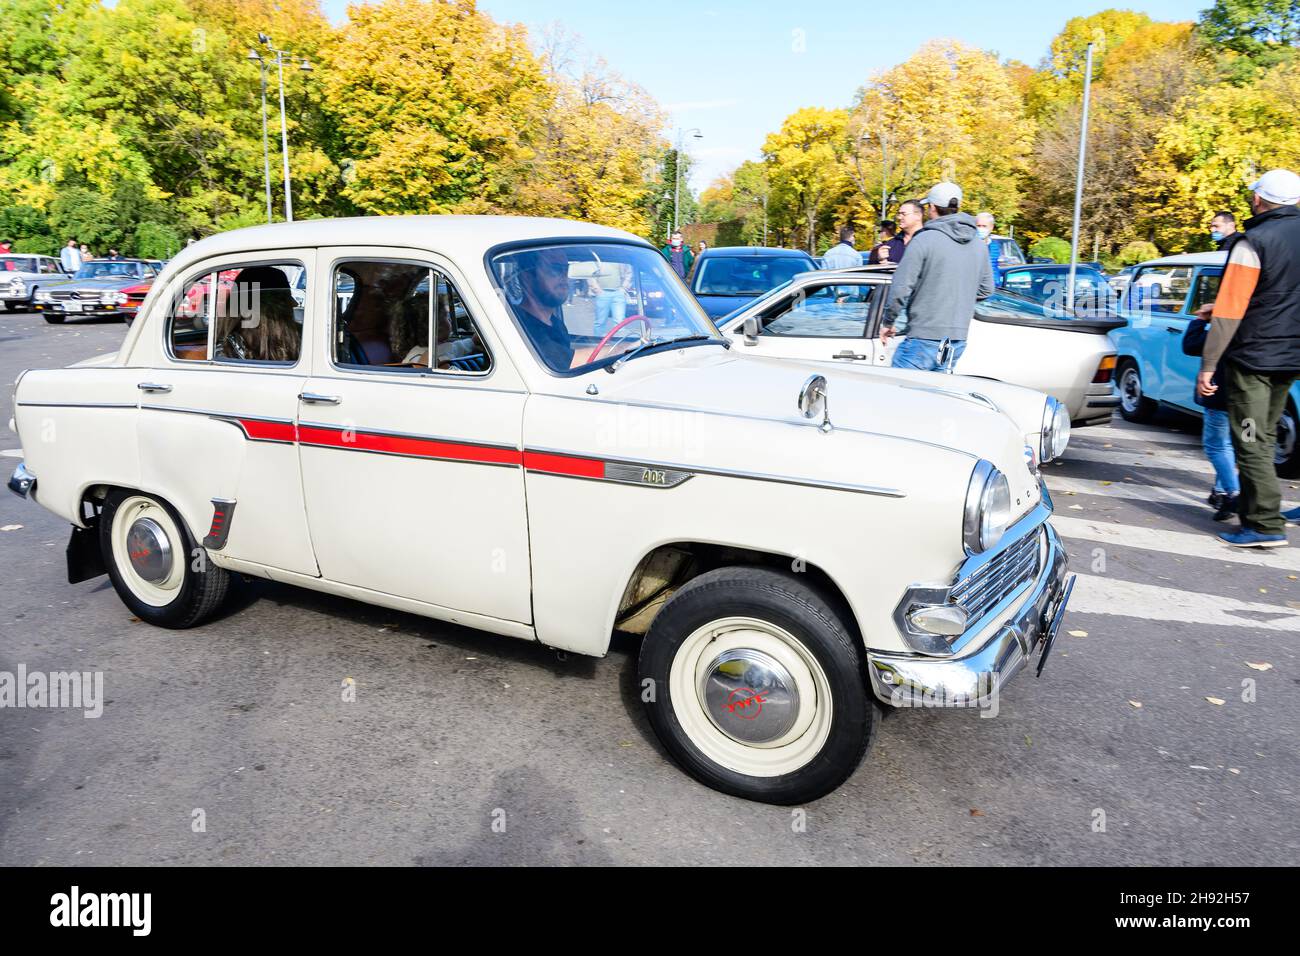 Bucharest, Romania, 24 October 2021: One vivid white Moskvitch 403 Russian vintage car in traffic in a street in the city center, in a sunny autumn da Stock Photo